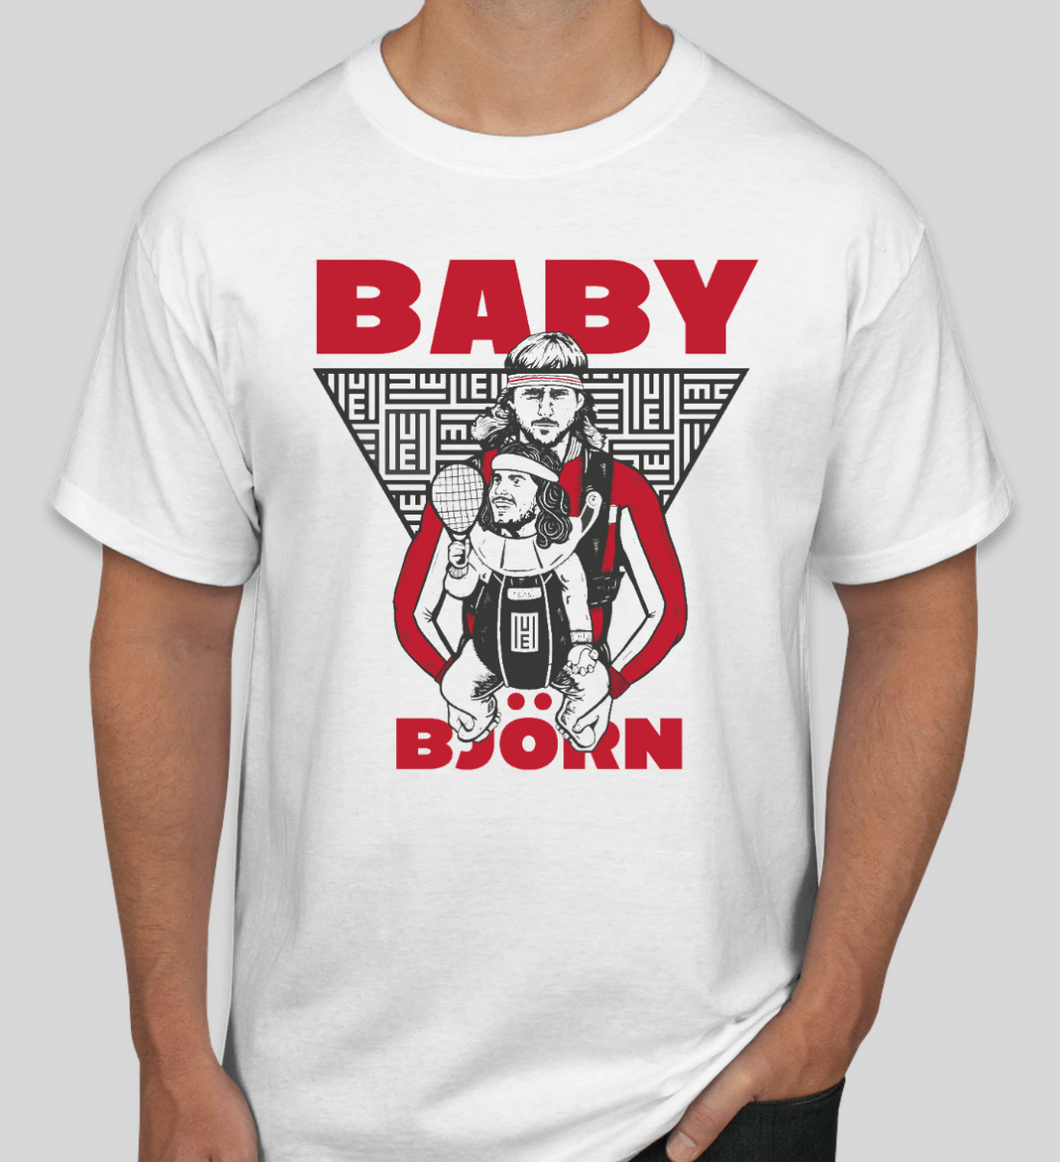 Baby Björn T-Shirt [LIMITED EDITION]